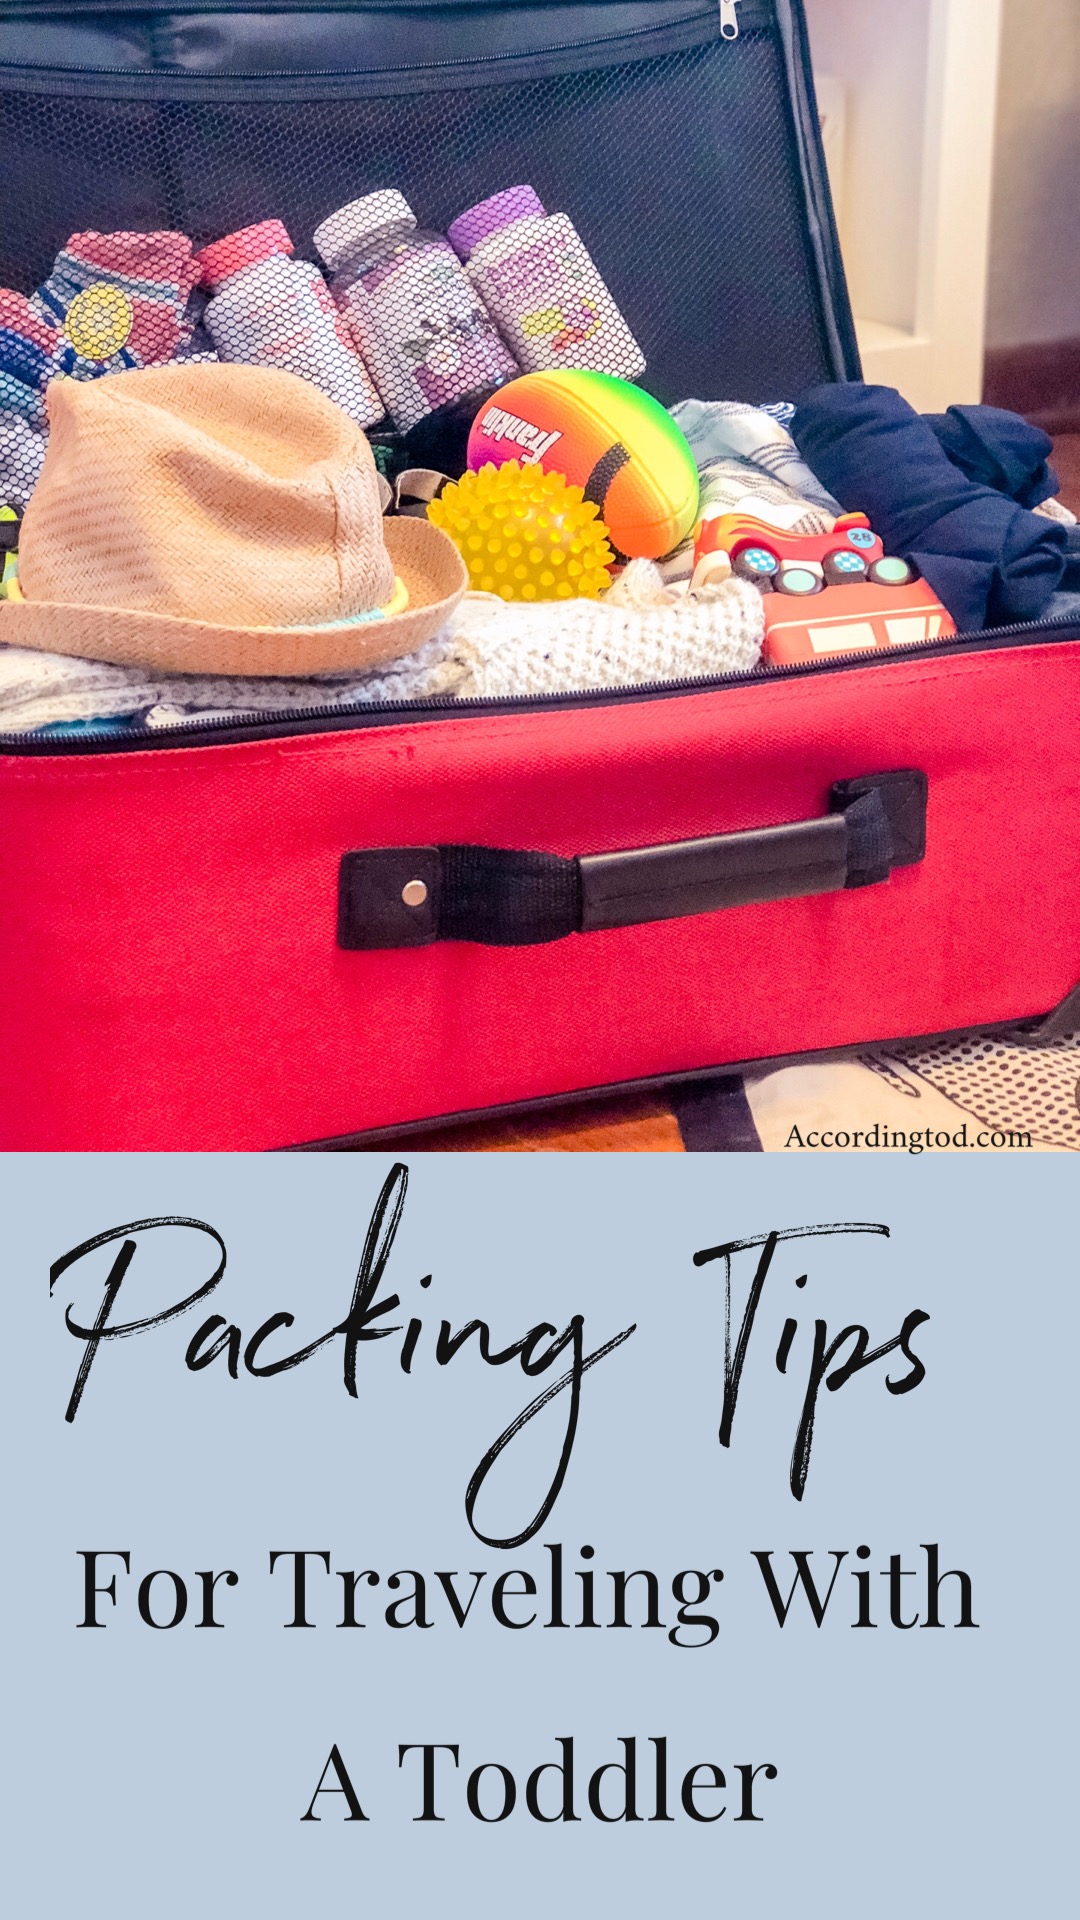 TRAVELING WITH BABY FOOD • IDEAS • PACKING TIPS & RULES